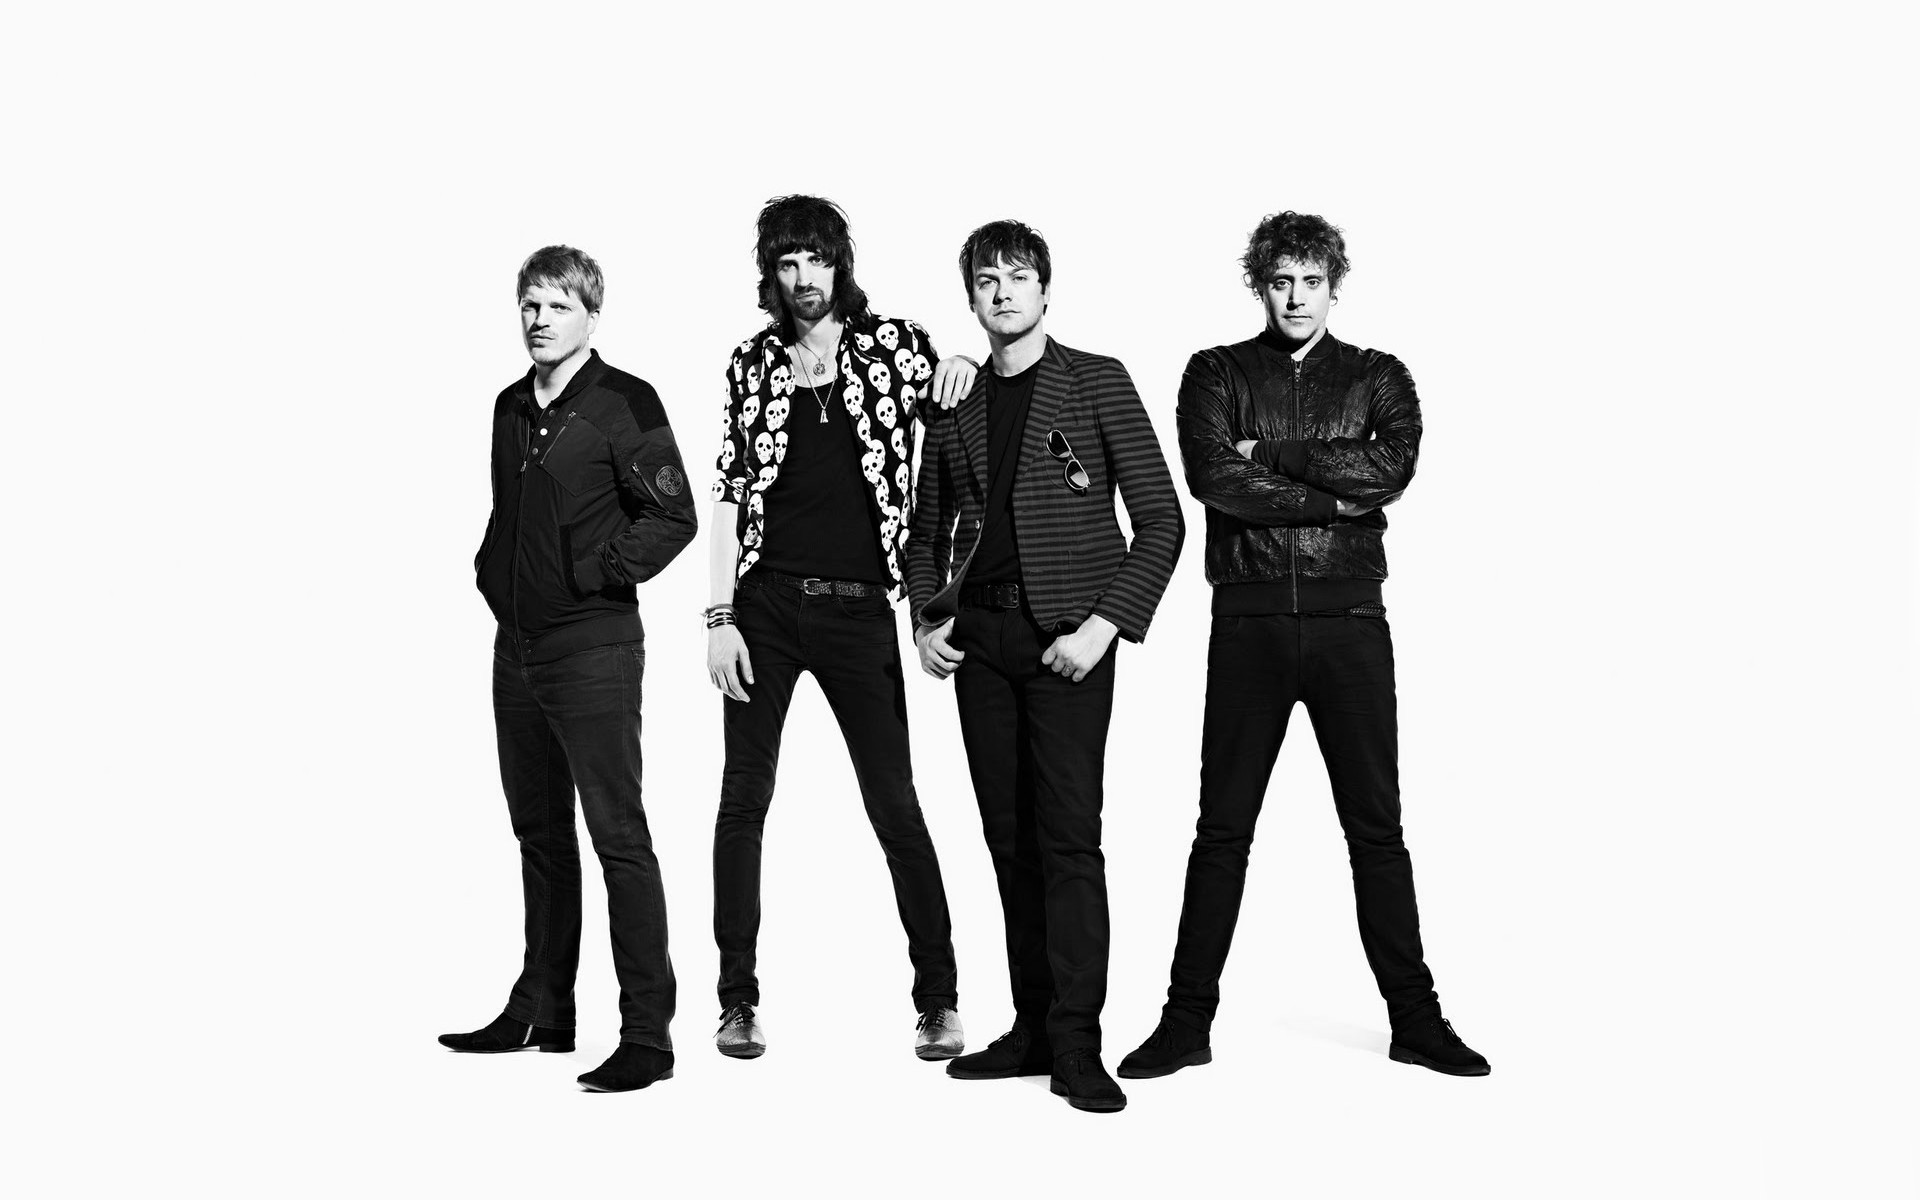 men, Grayscale, British, Music, Bands, White, Background, Kasabian, Tom, Meighan Wallpaper